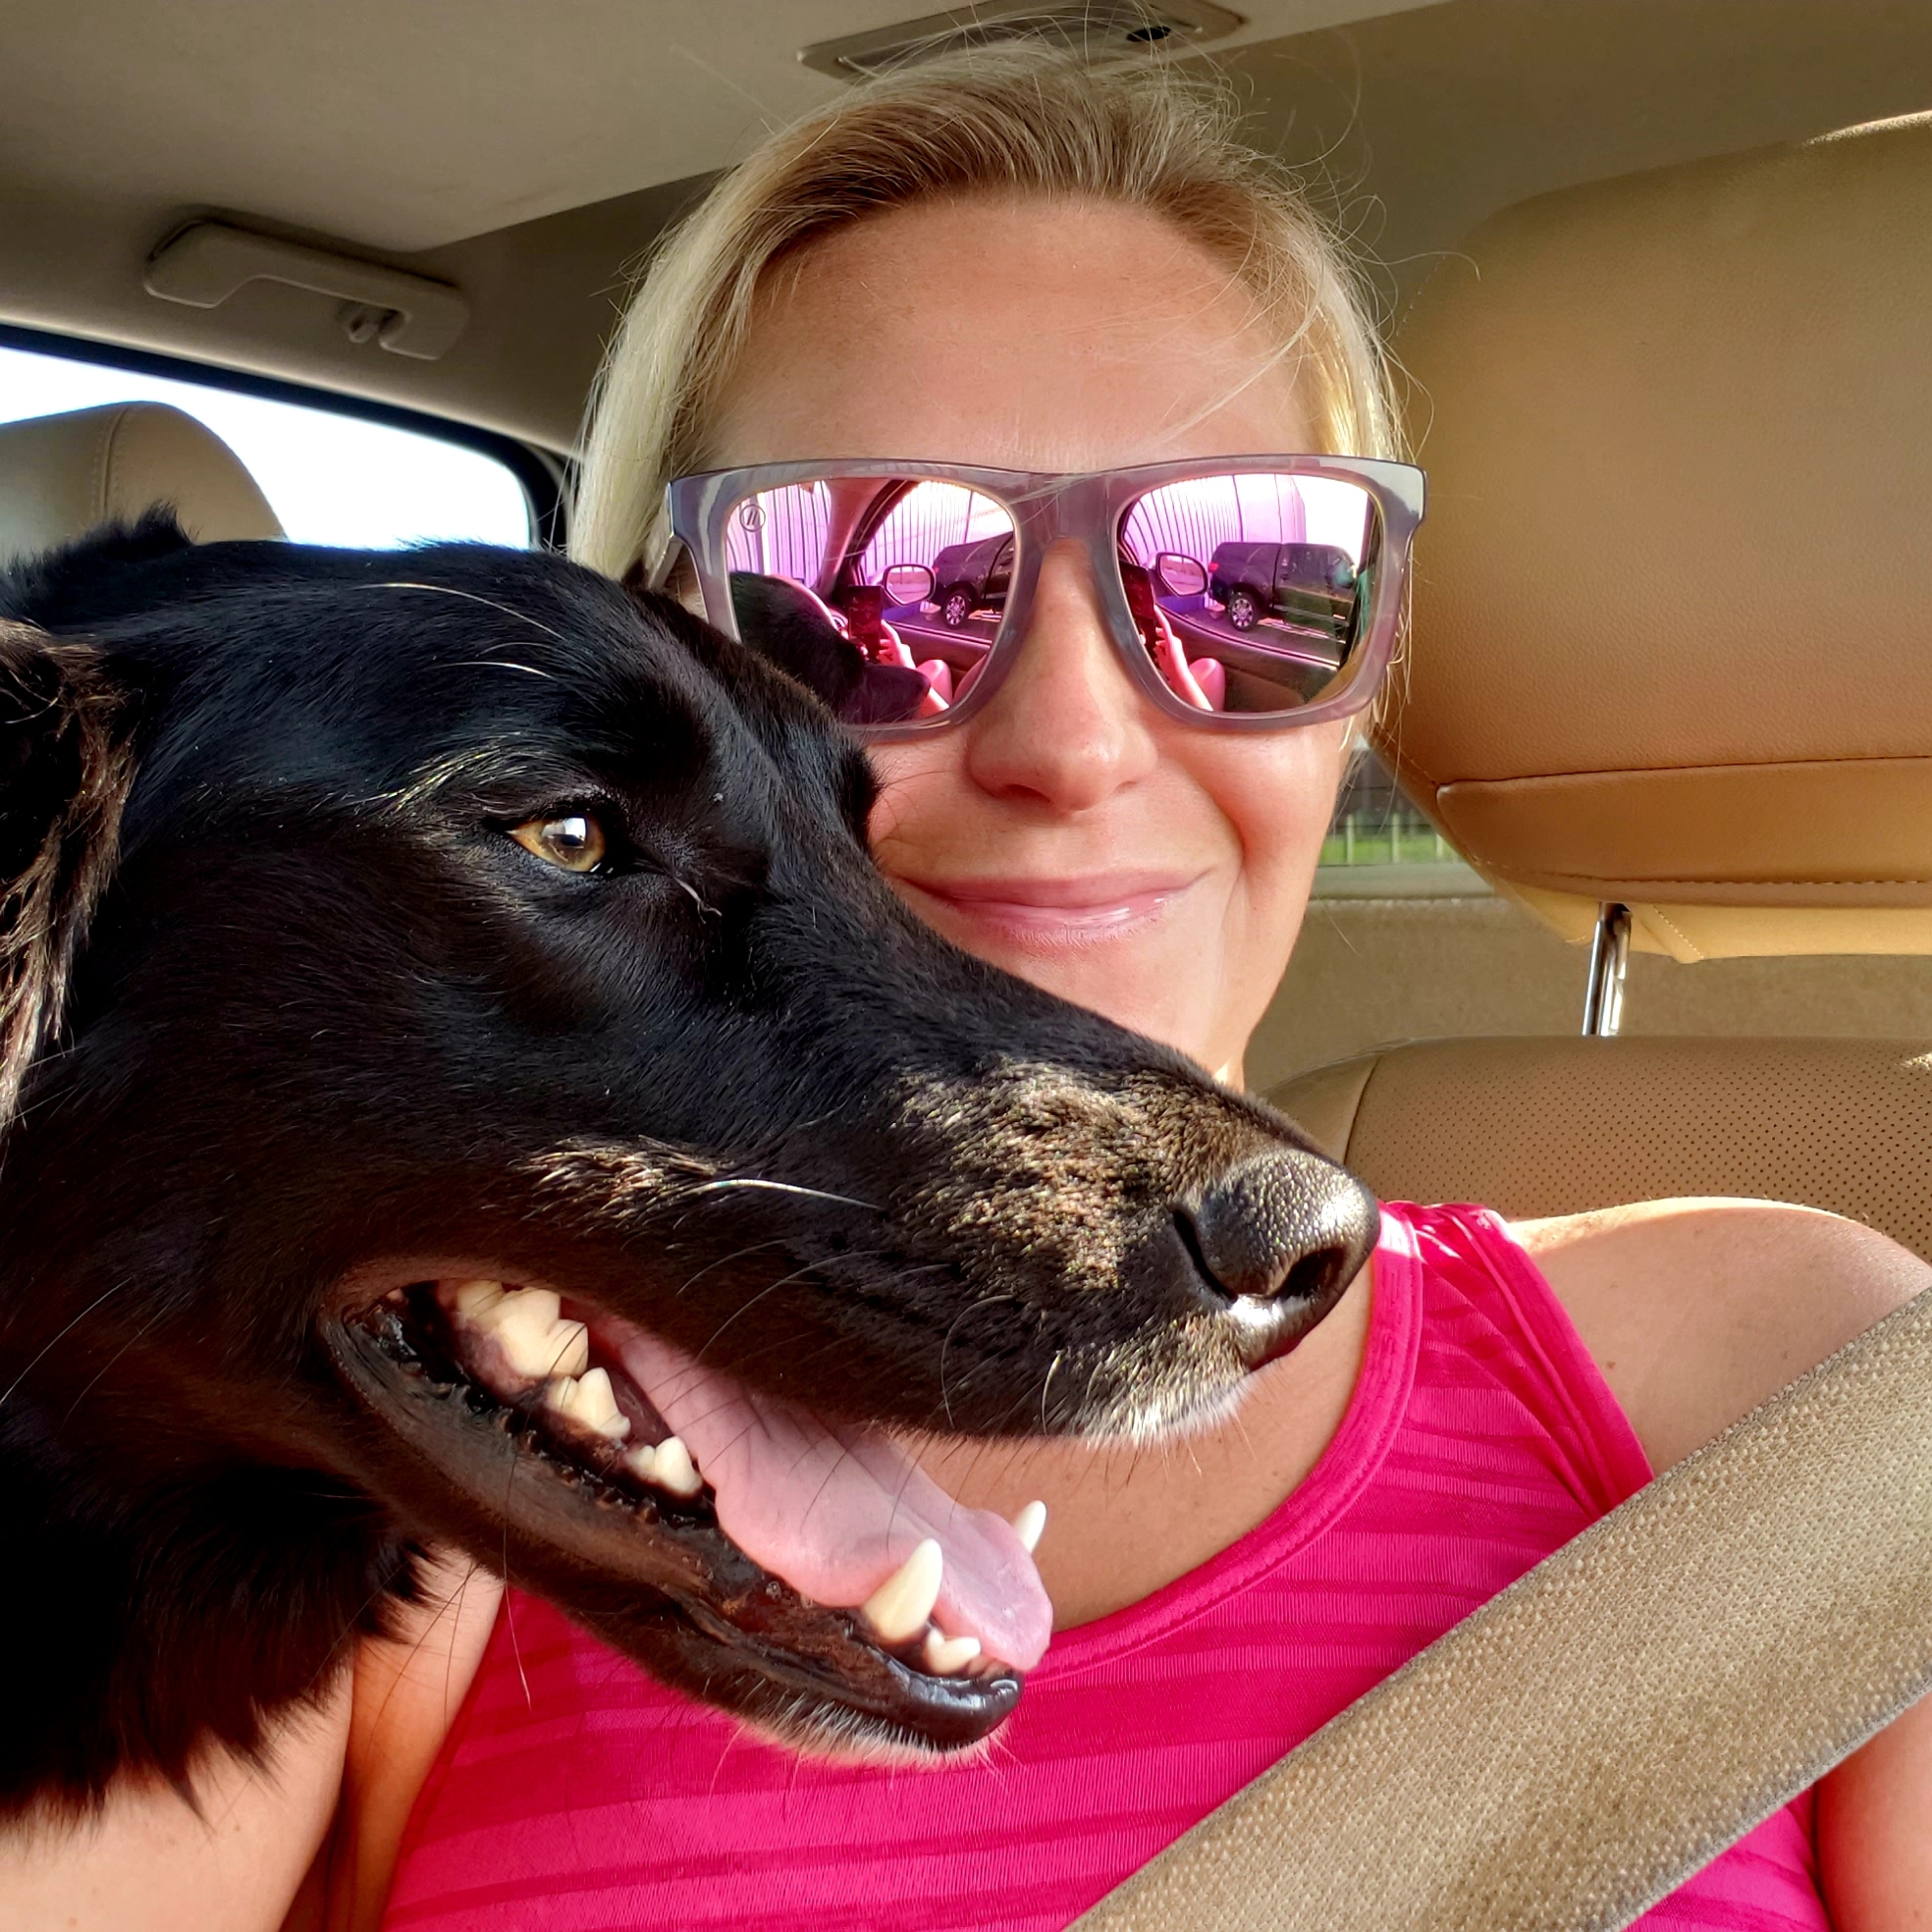 A blonde female veterinary professional wearing a bright pink tanktop pictured with the face of a large smiling black dog.